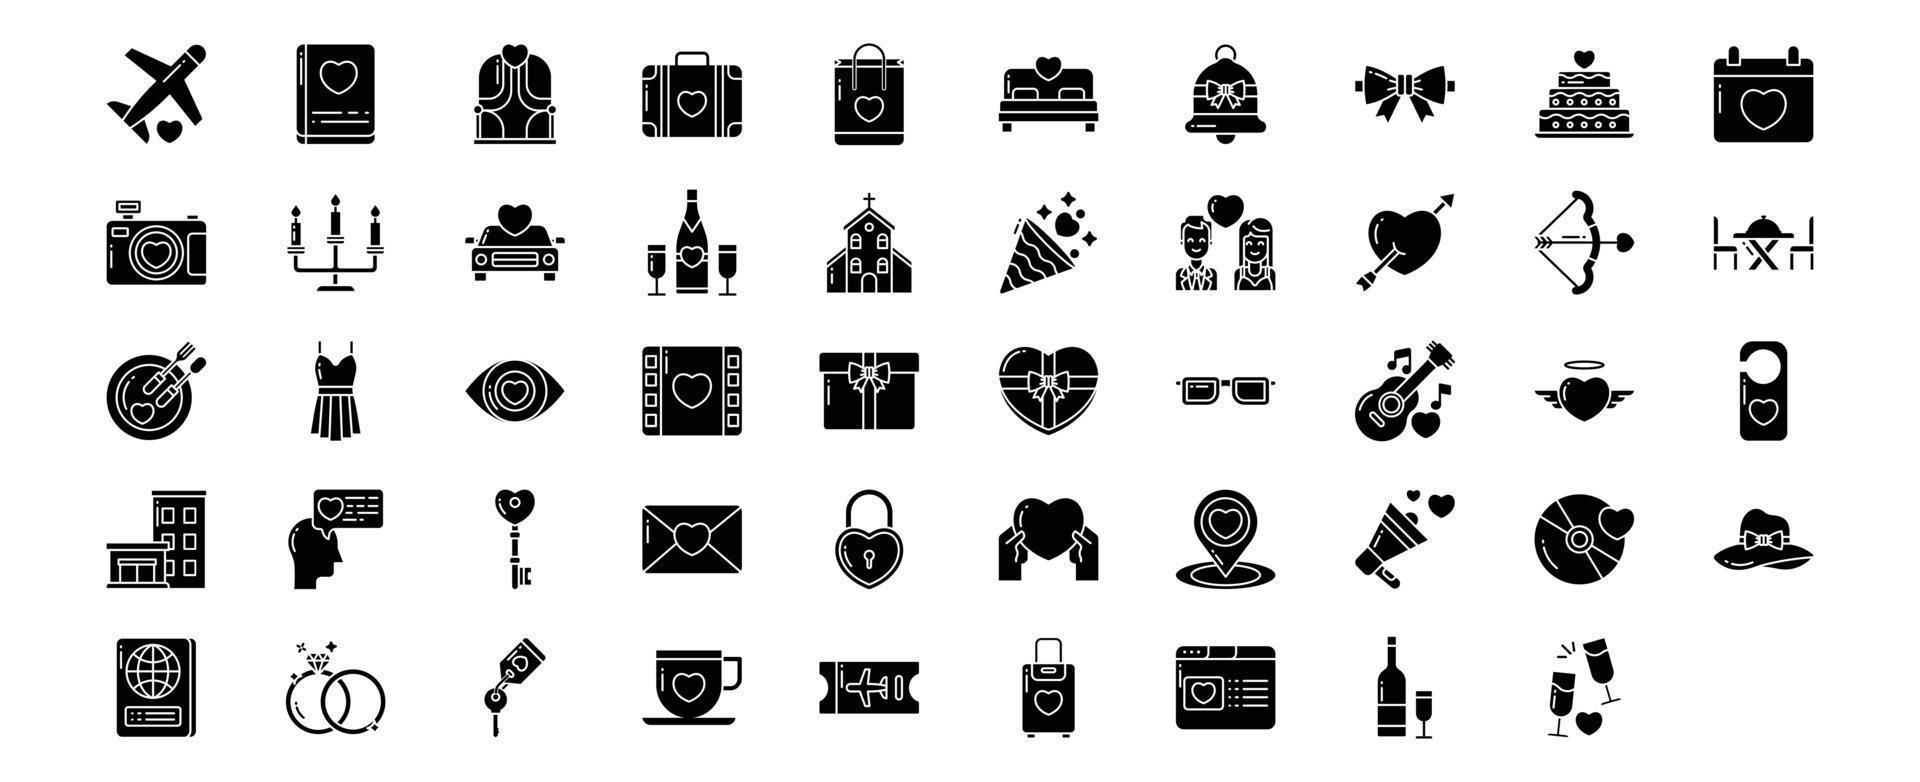 Collection of icons related to Honeymoon and romance, including icons like Airplane, Photo album, Bag, Cake and more. vector illustrations, Pixel Perfect set